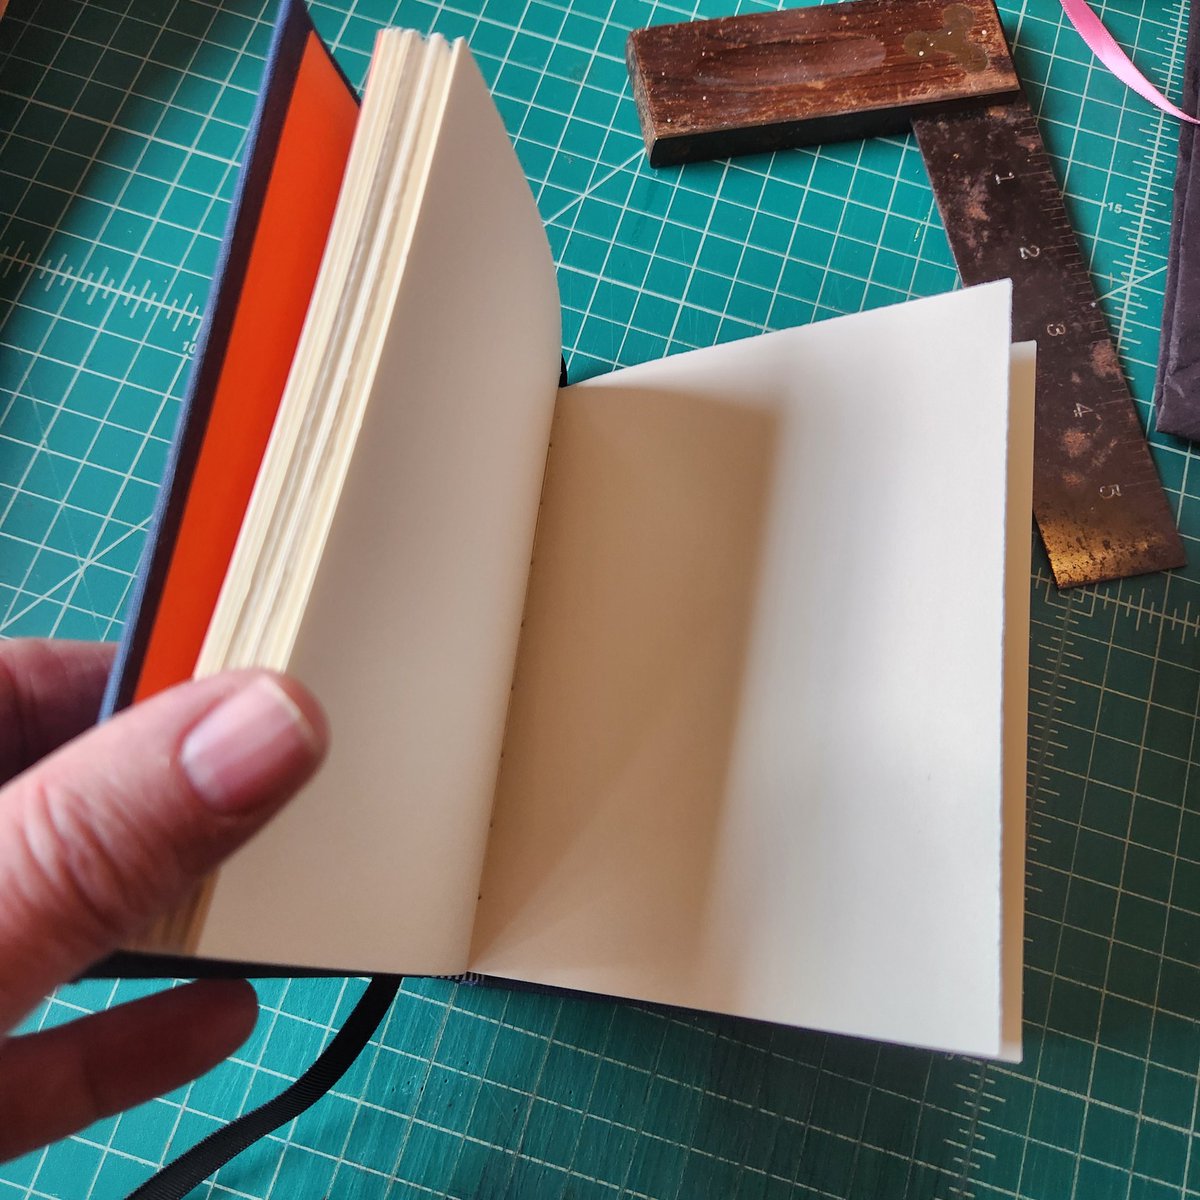 Another casebound #catchpennybooks sketchbook, which I'm happier with than the last one I made. Might gift it. Bookcloth was bought at #theresourceexchage. #ammaking #ambookbinding #bookarts